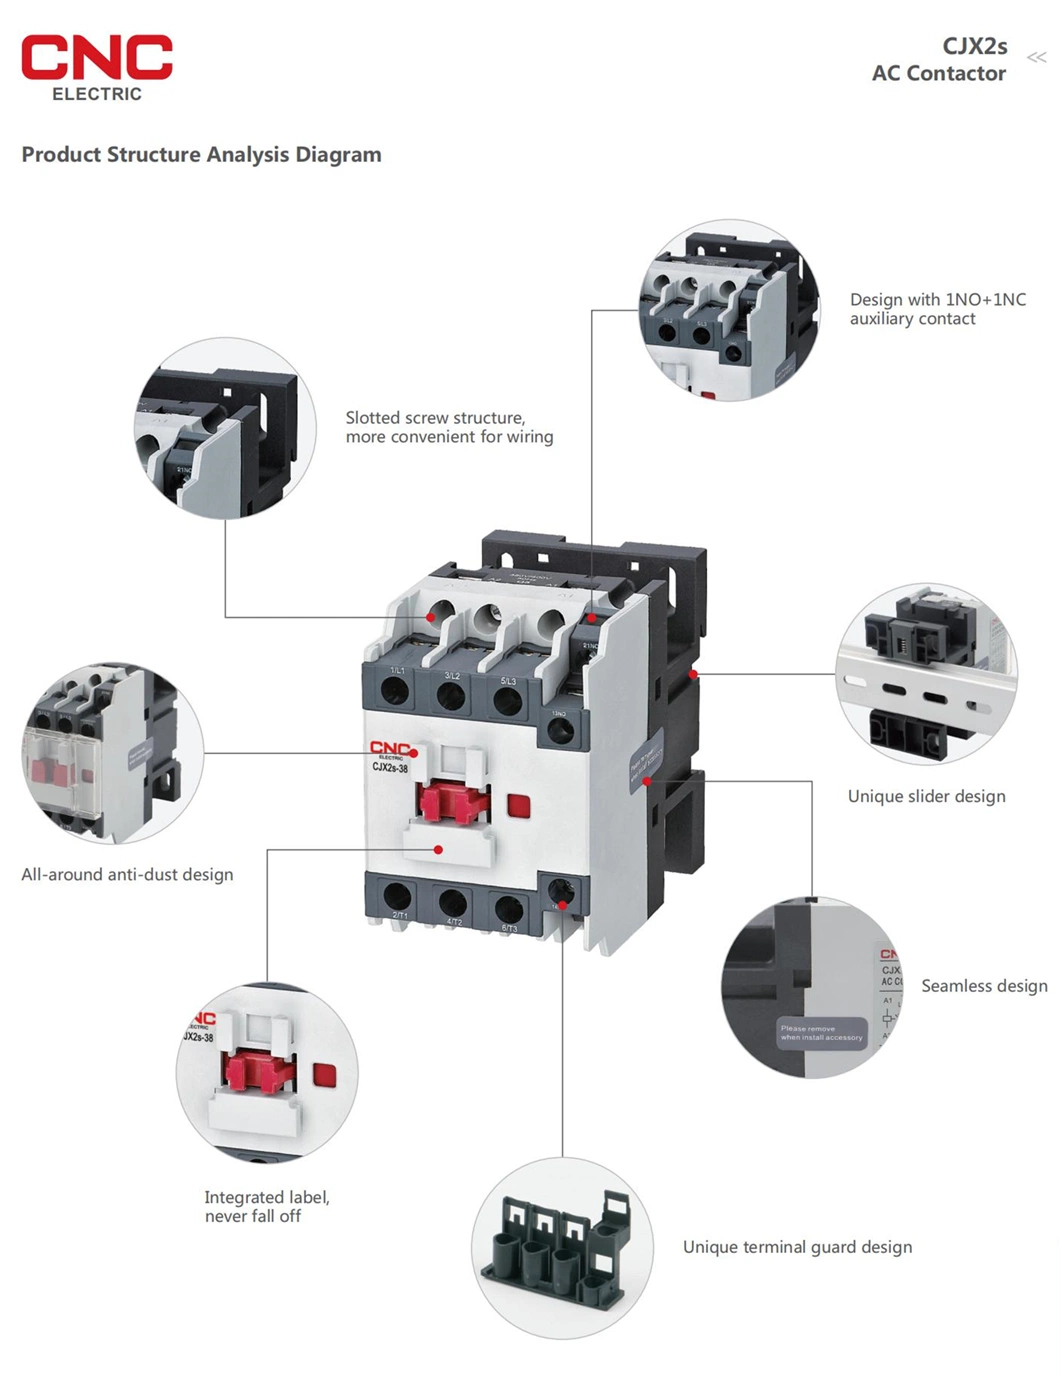 CNC High Quality Wholesale Custom Cheap 3 Phase AC Magnetic Contactor 3 Phase 9A Contactor 3 Phase 80A 480V AC Contactor